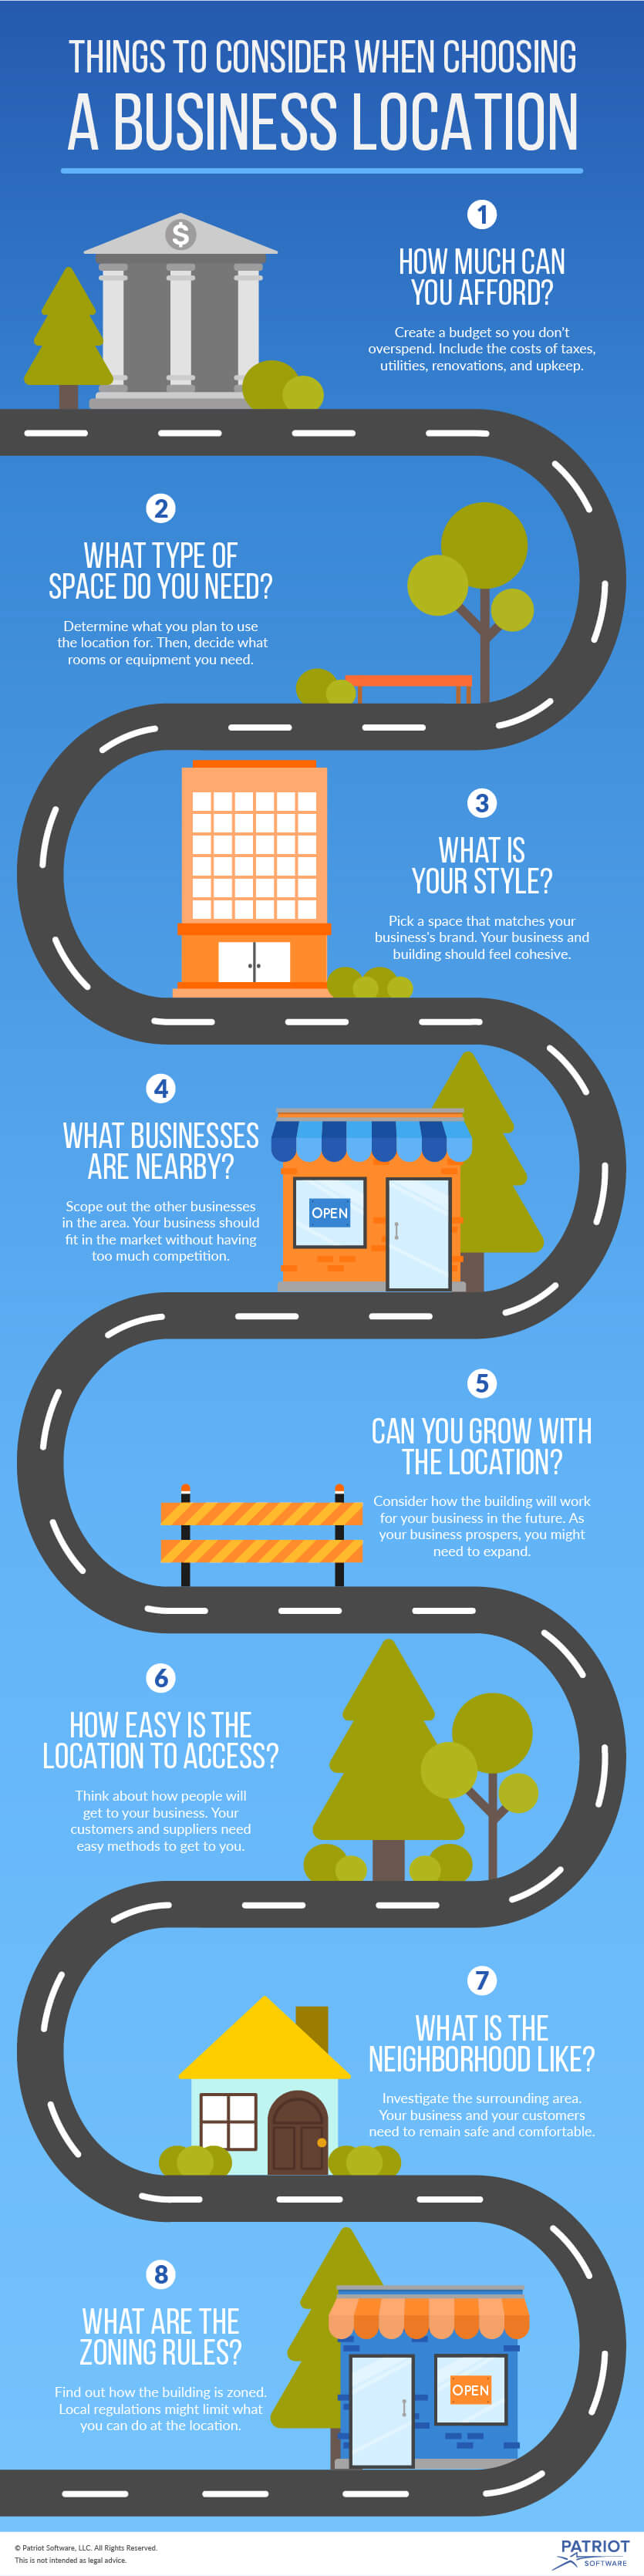 Things to Consider When Choosing a Business Location Infographic